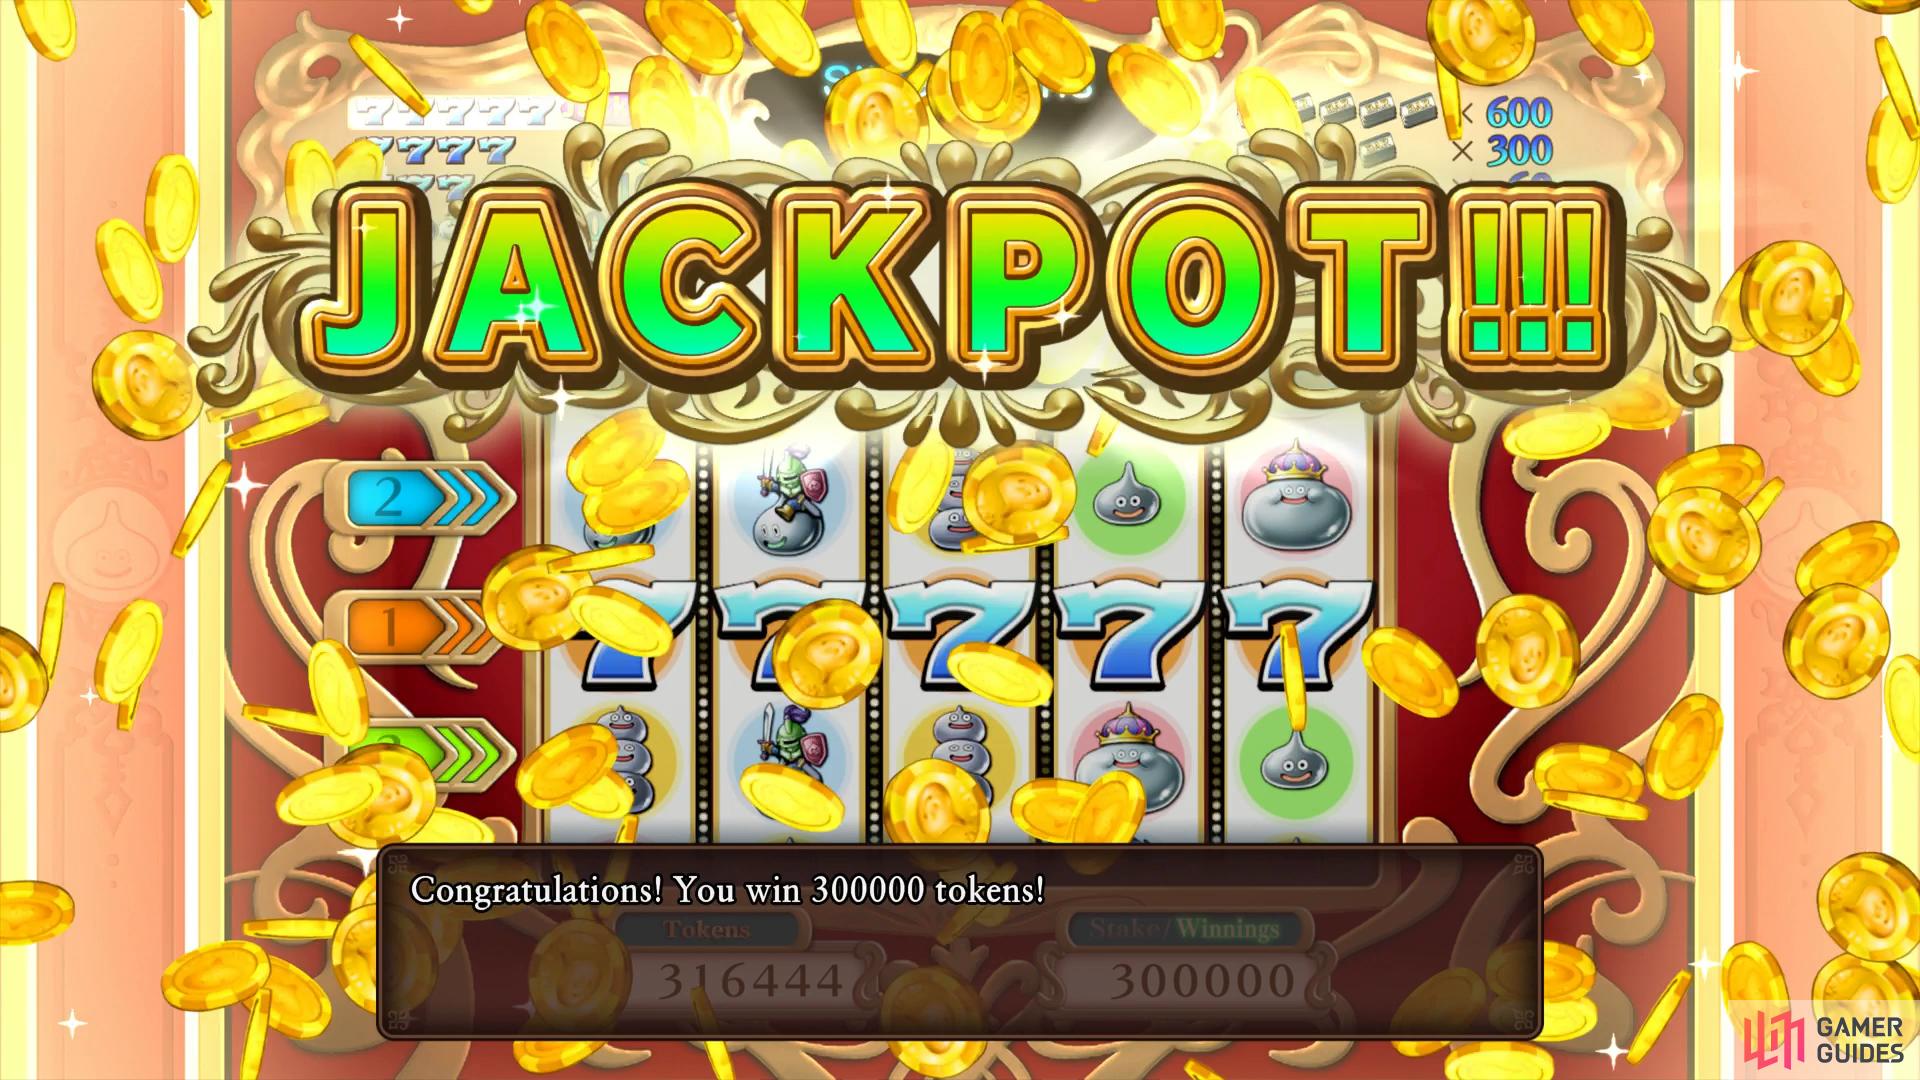 Dont be duped by the sudden surge in luck